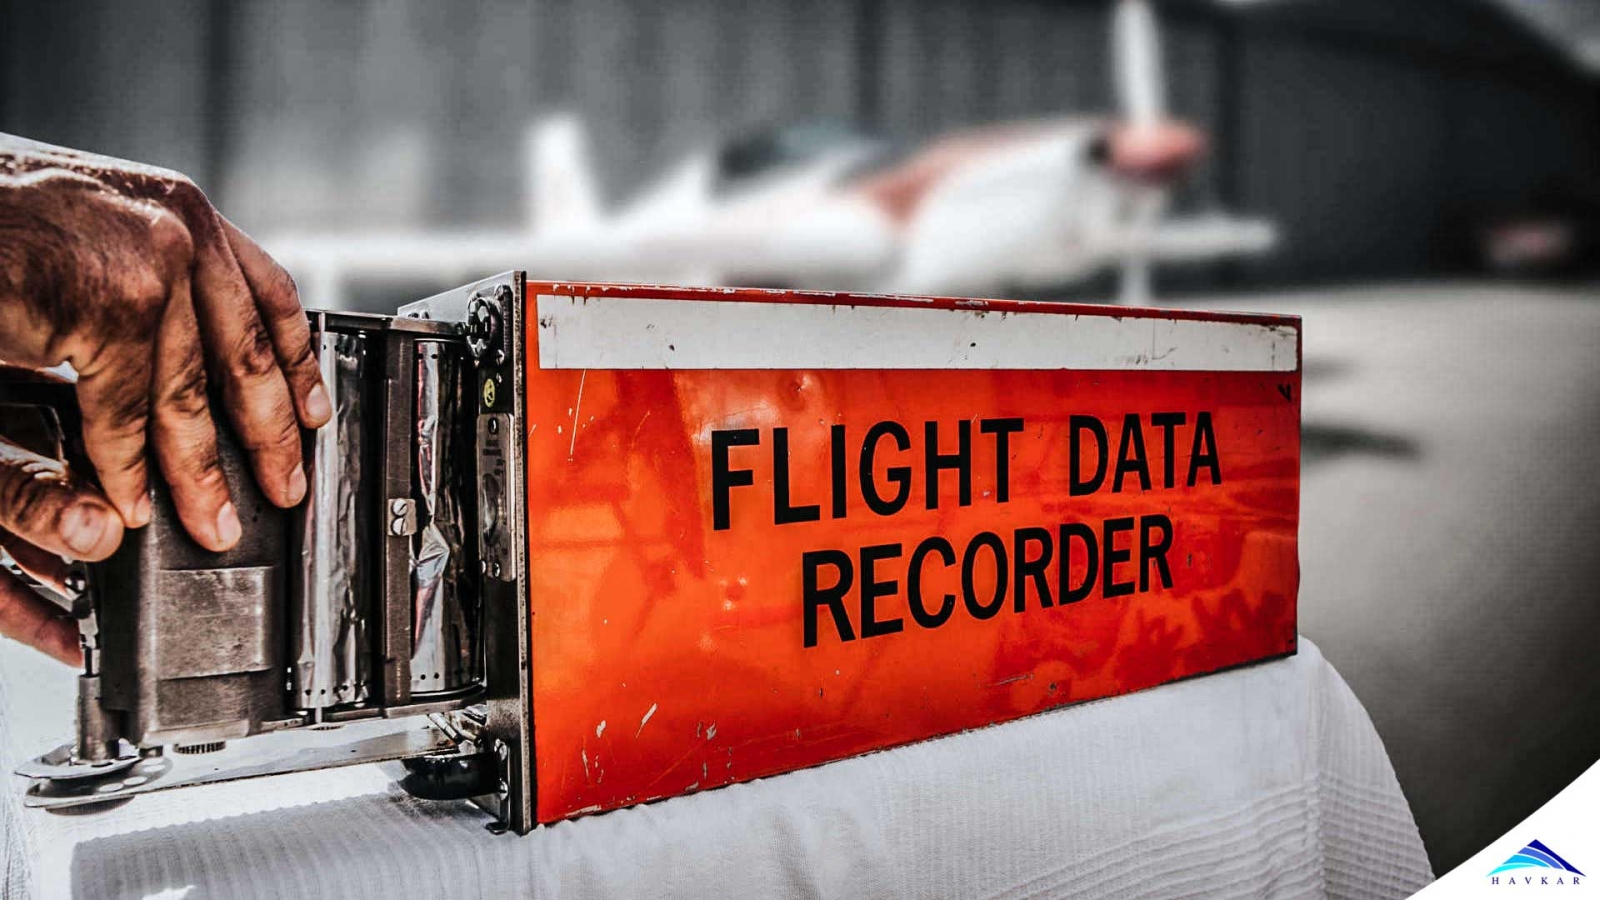 Flight recorder, Definition, History, Uses, & Facts